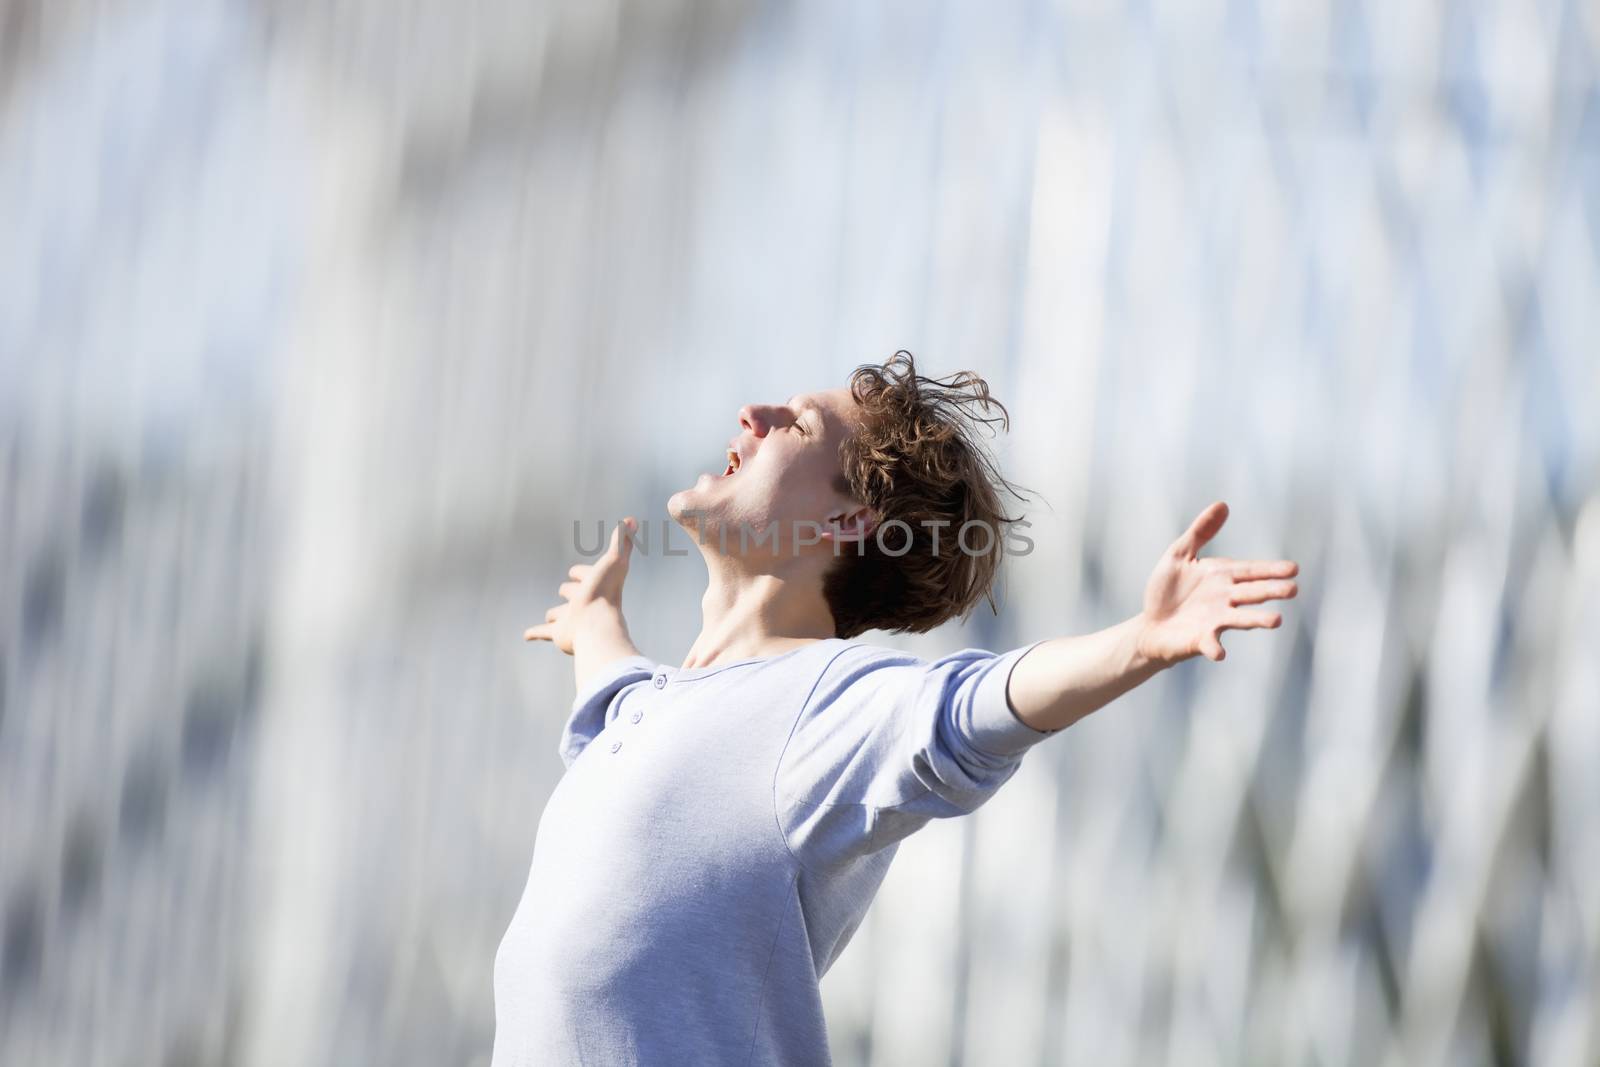 Excited Young Man Stretching out his Arm in Emotion Outdoors